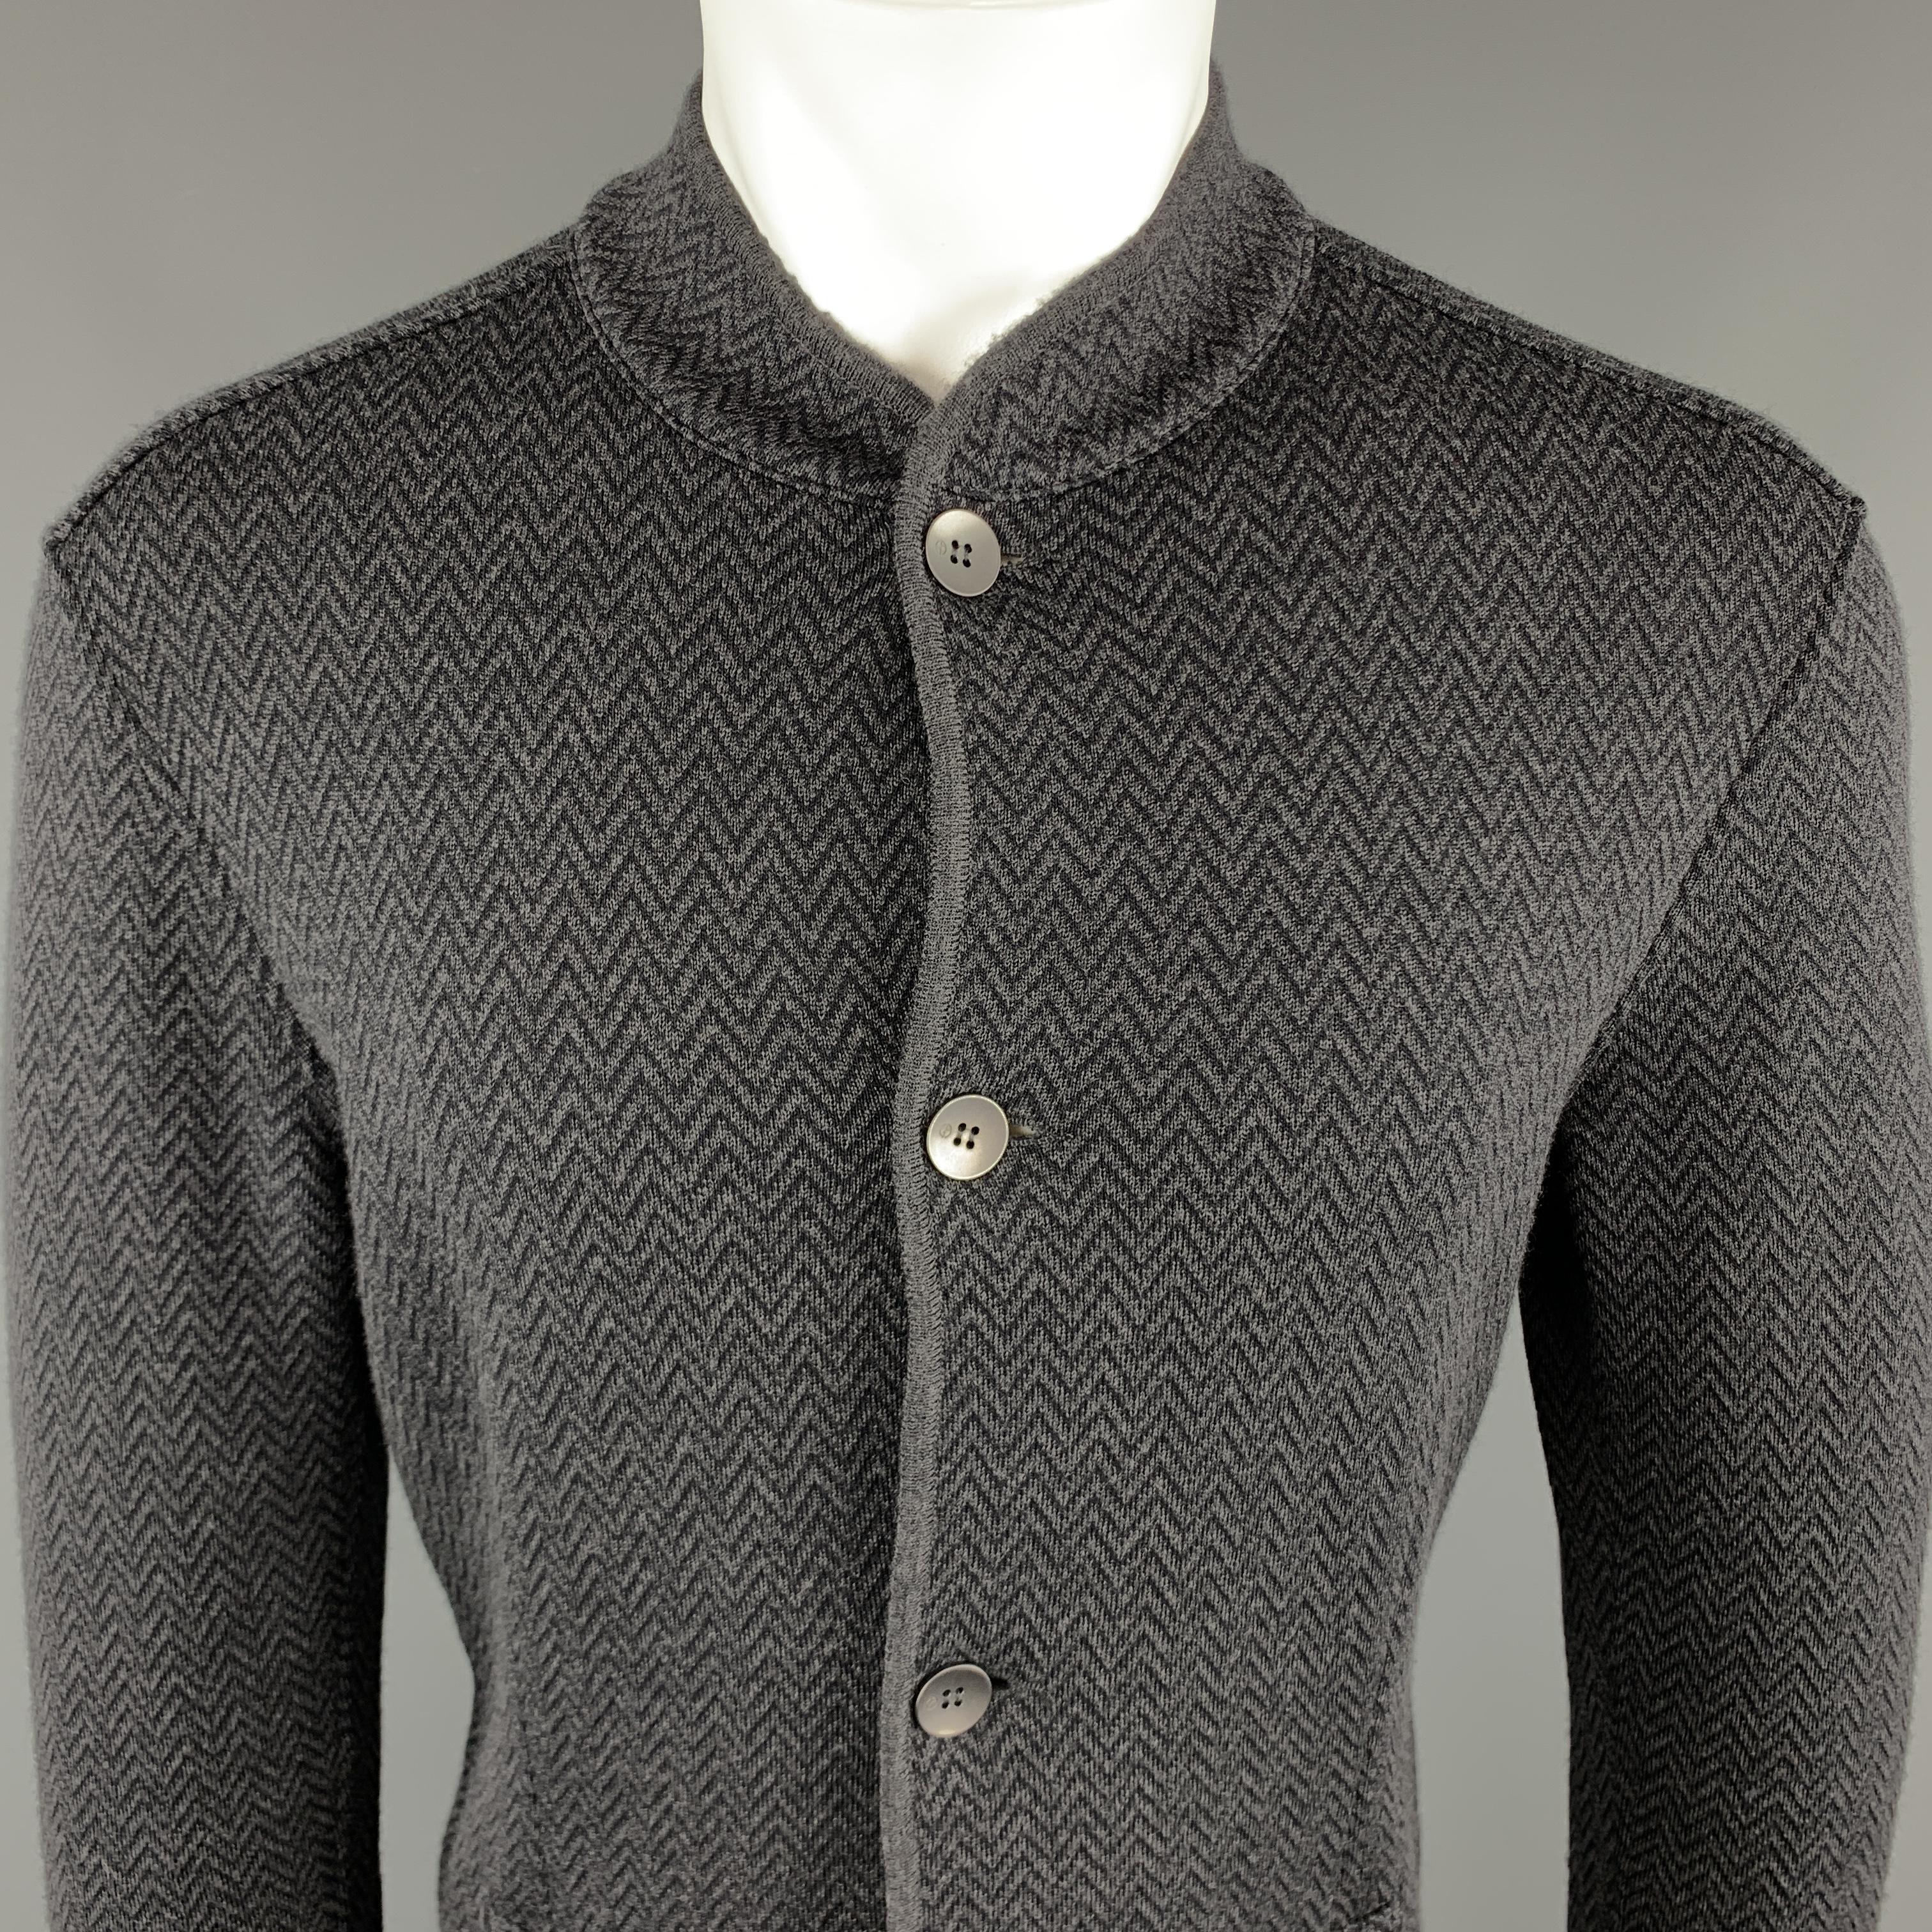 GIORGIO ARMANI Jacket comes in charcoal and black tones in a zig zag wool blend material, with a nehru collar, four buttons at closure, slit pockets, unbuttoned cuffs, unlined. Made in Italy.

Excellent Pre-Owned Condition.
Marked: IT